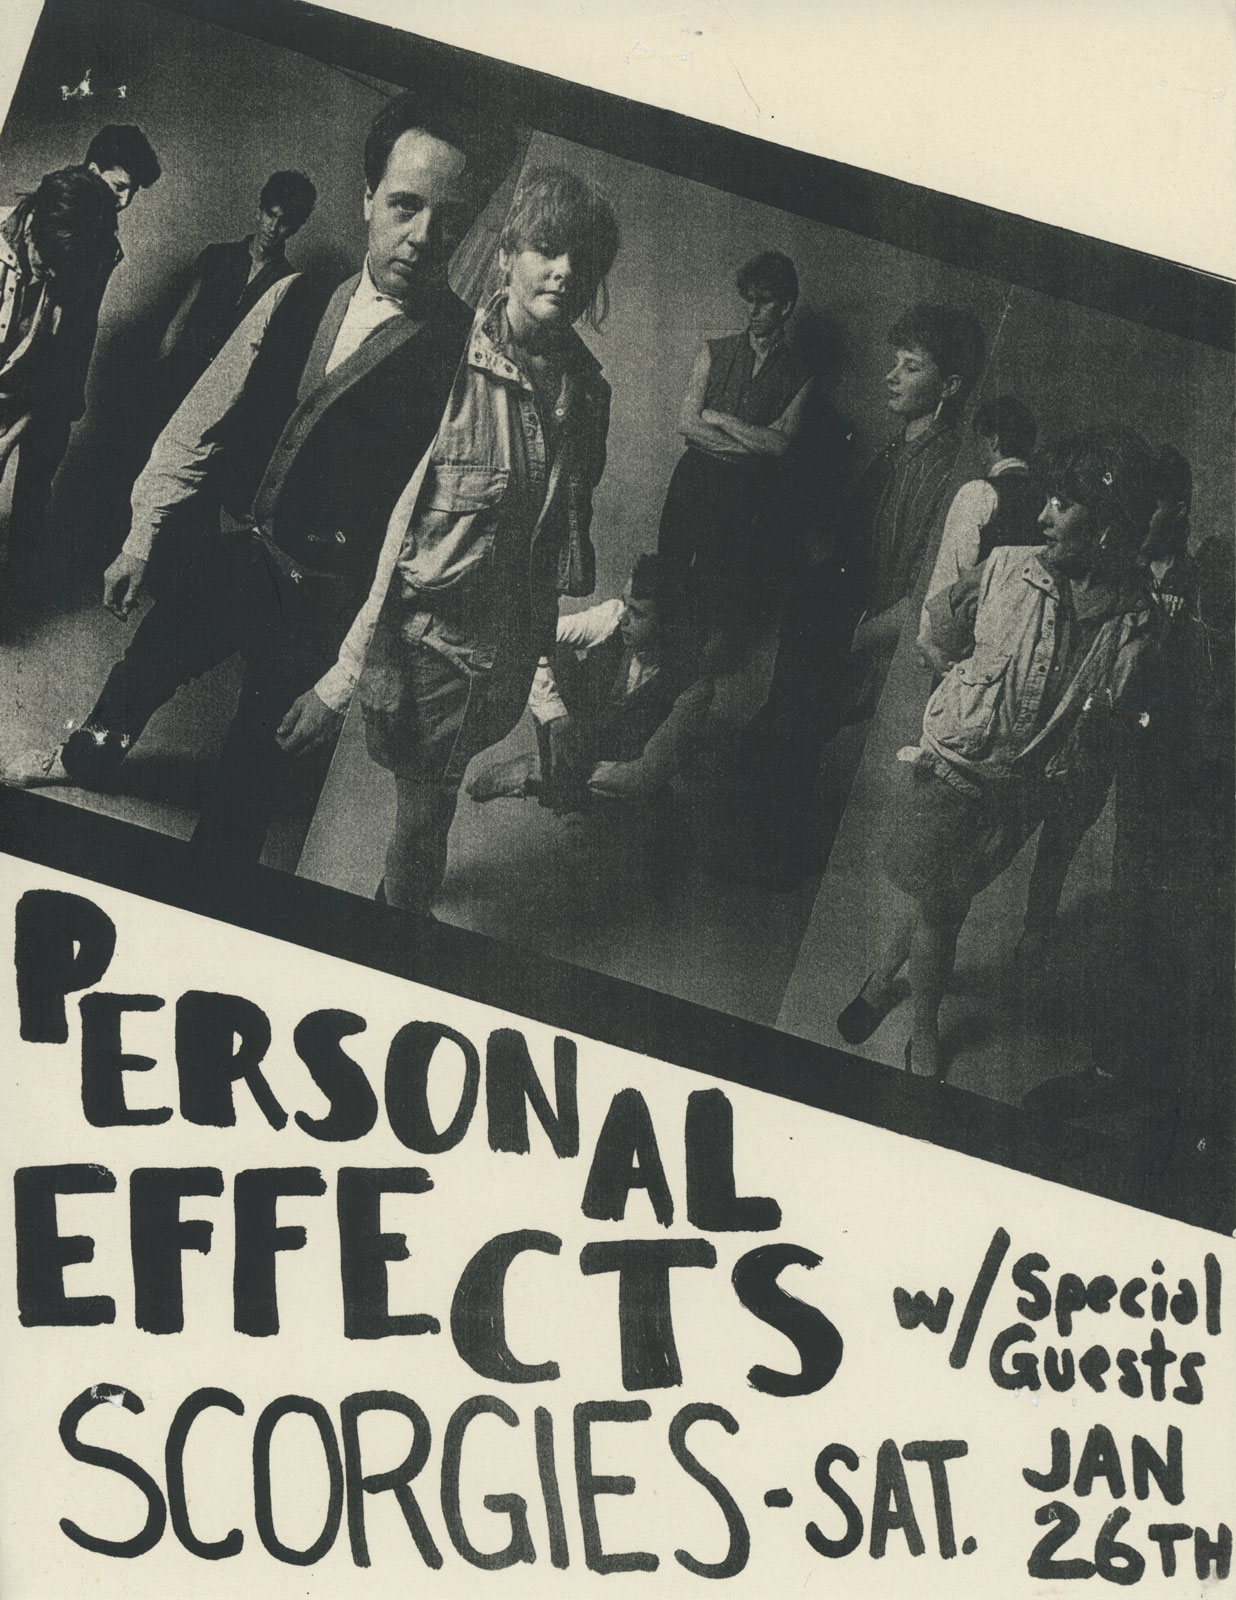 Poster for Personal Effects at Scorgies in Rochester, New York 01.26.1985. Bob Martin designed this poster.